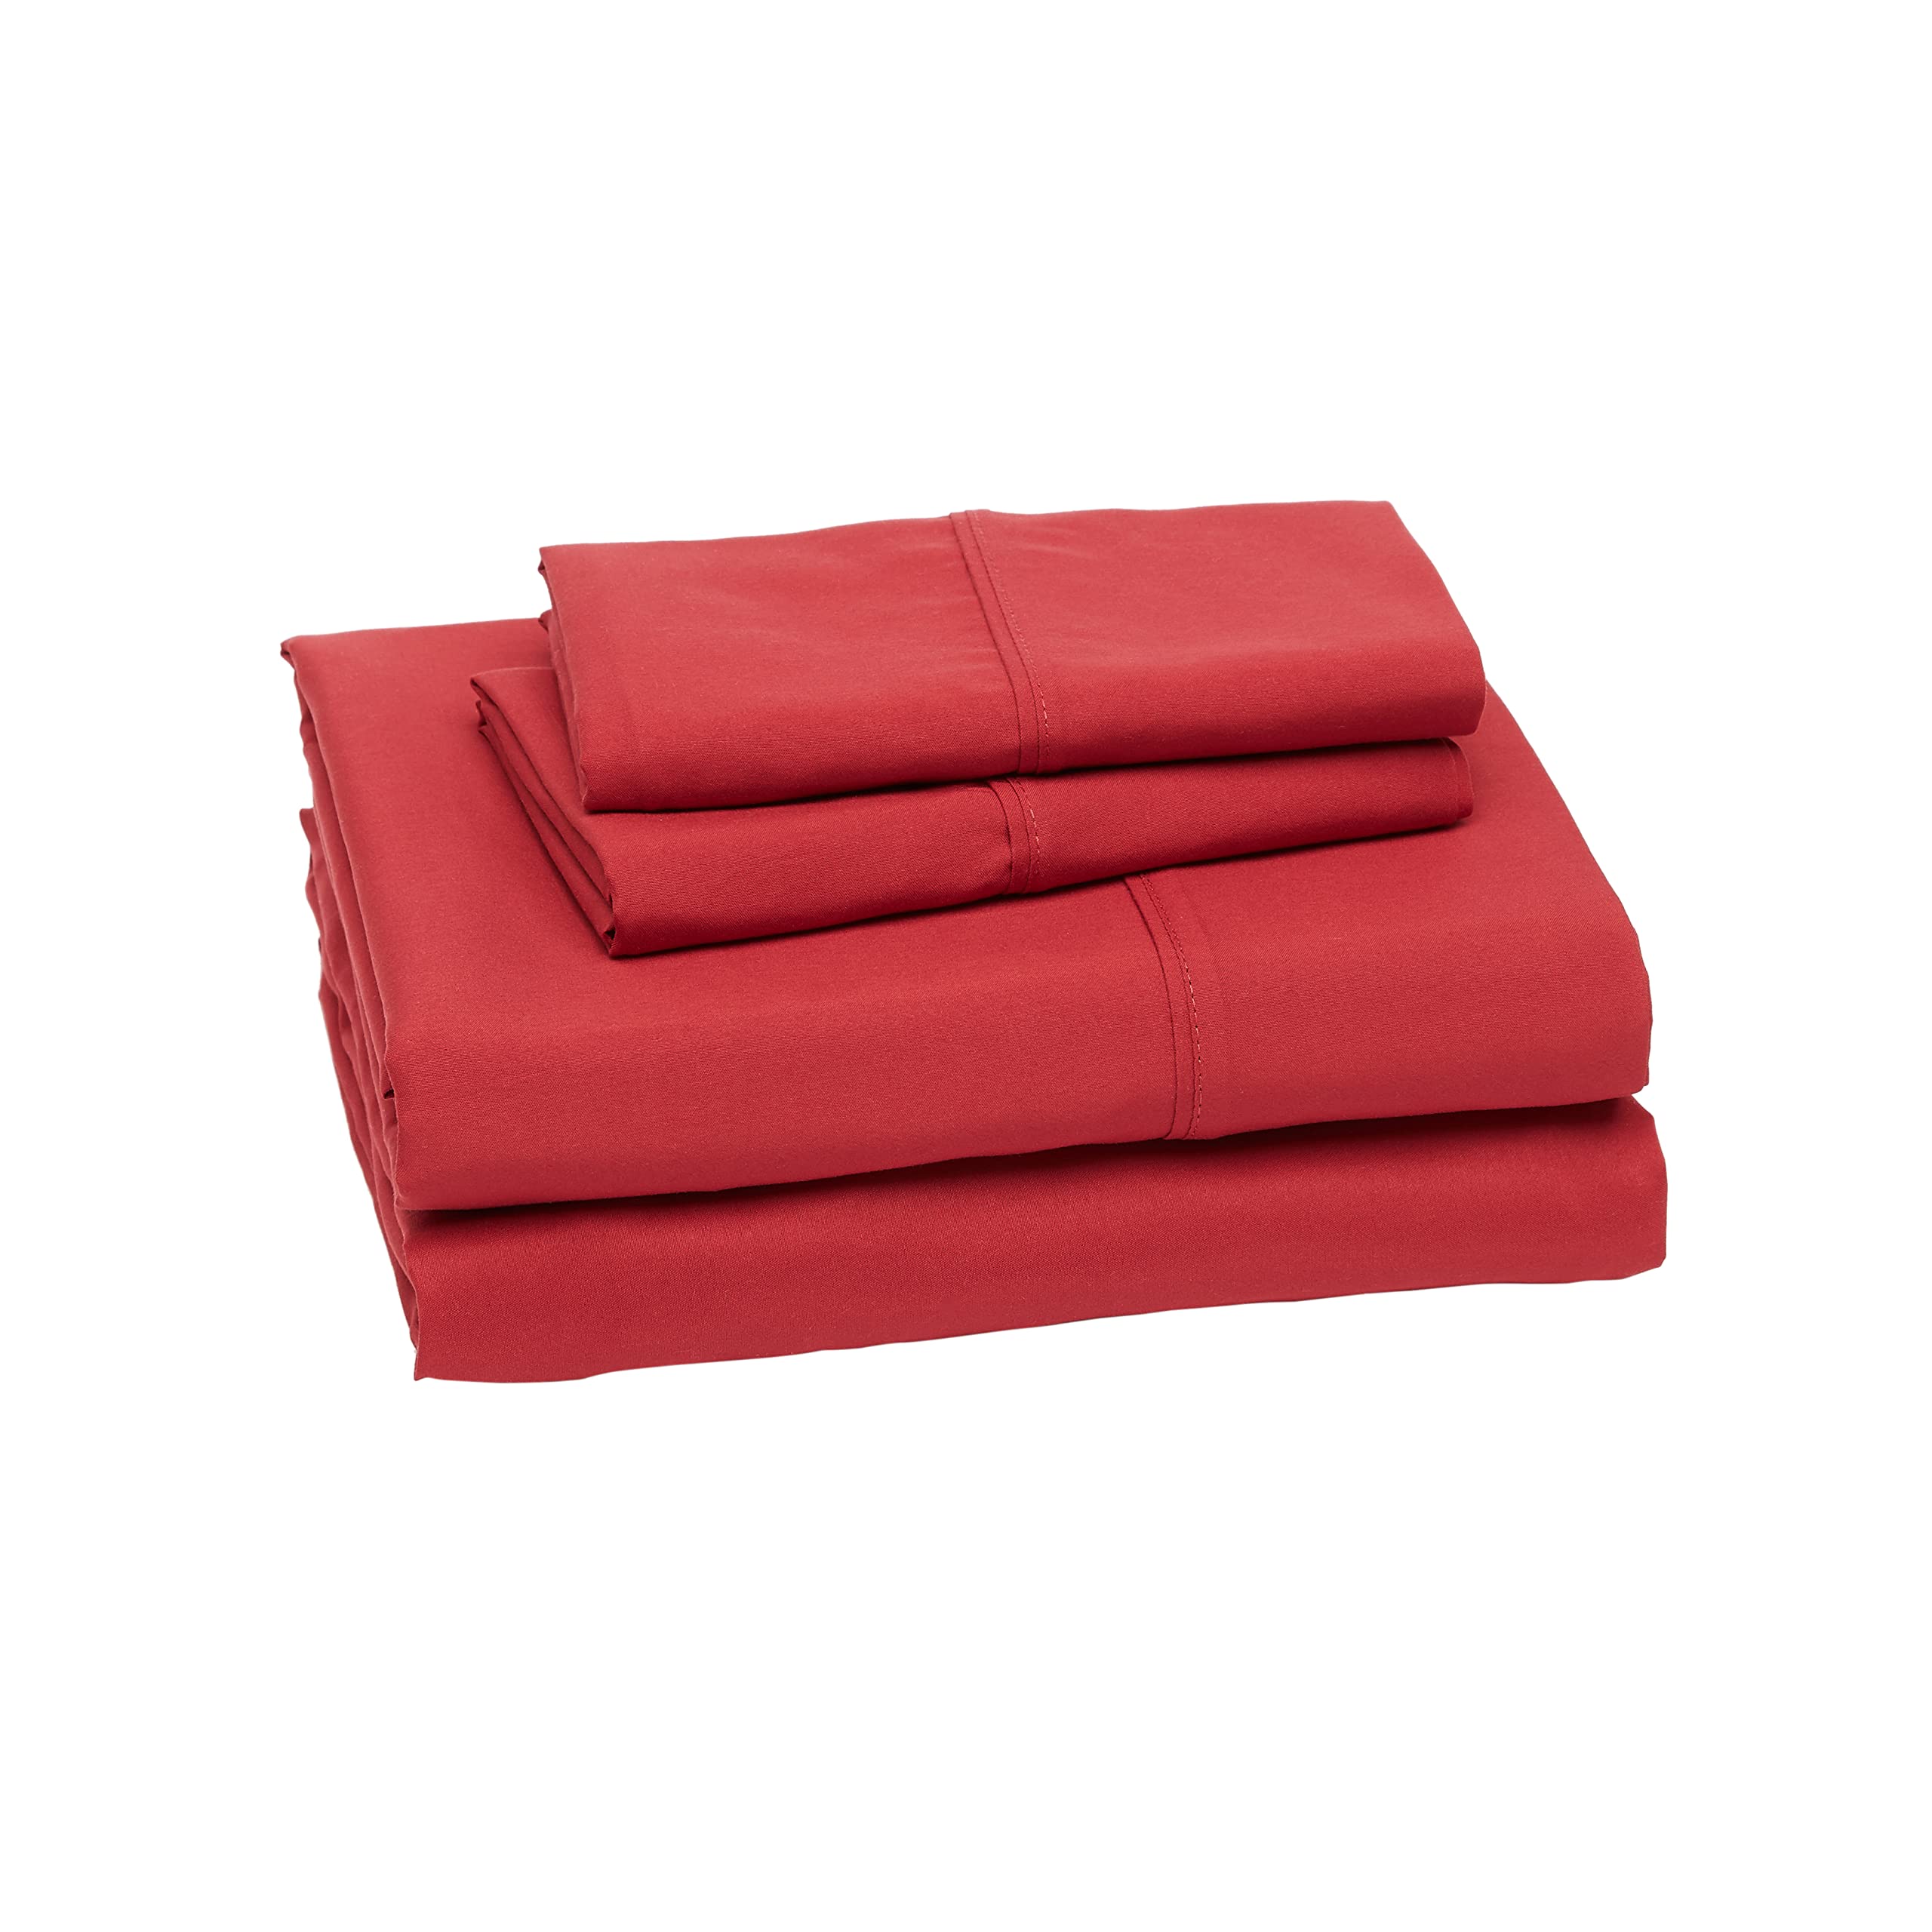 Book Cover Amazon Basics Lightweight Super Soft Easy Care Microfiber Bed Sheet Set with 14” Deep Pockets - Full, Red